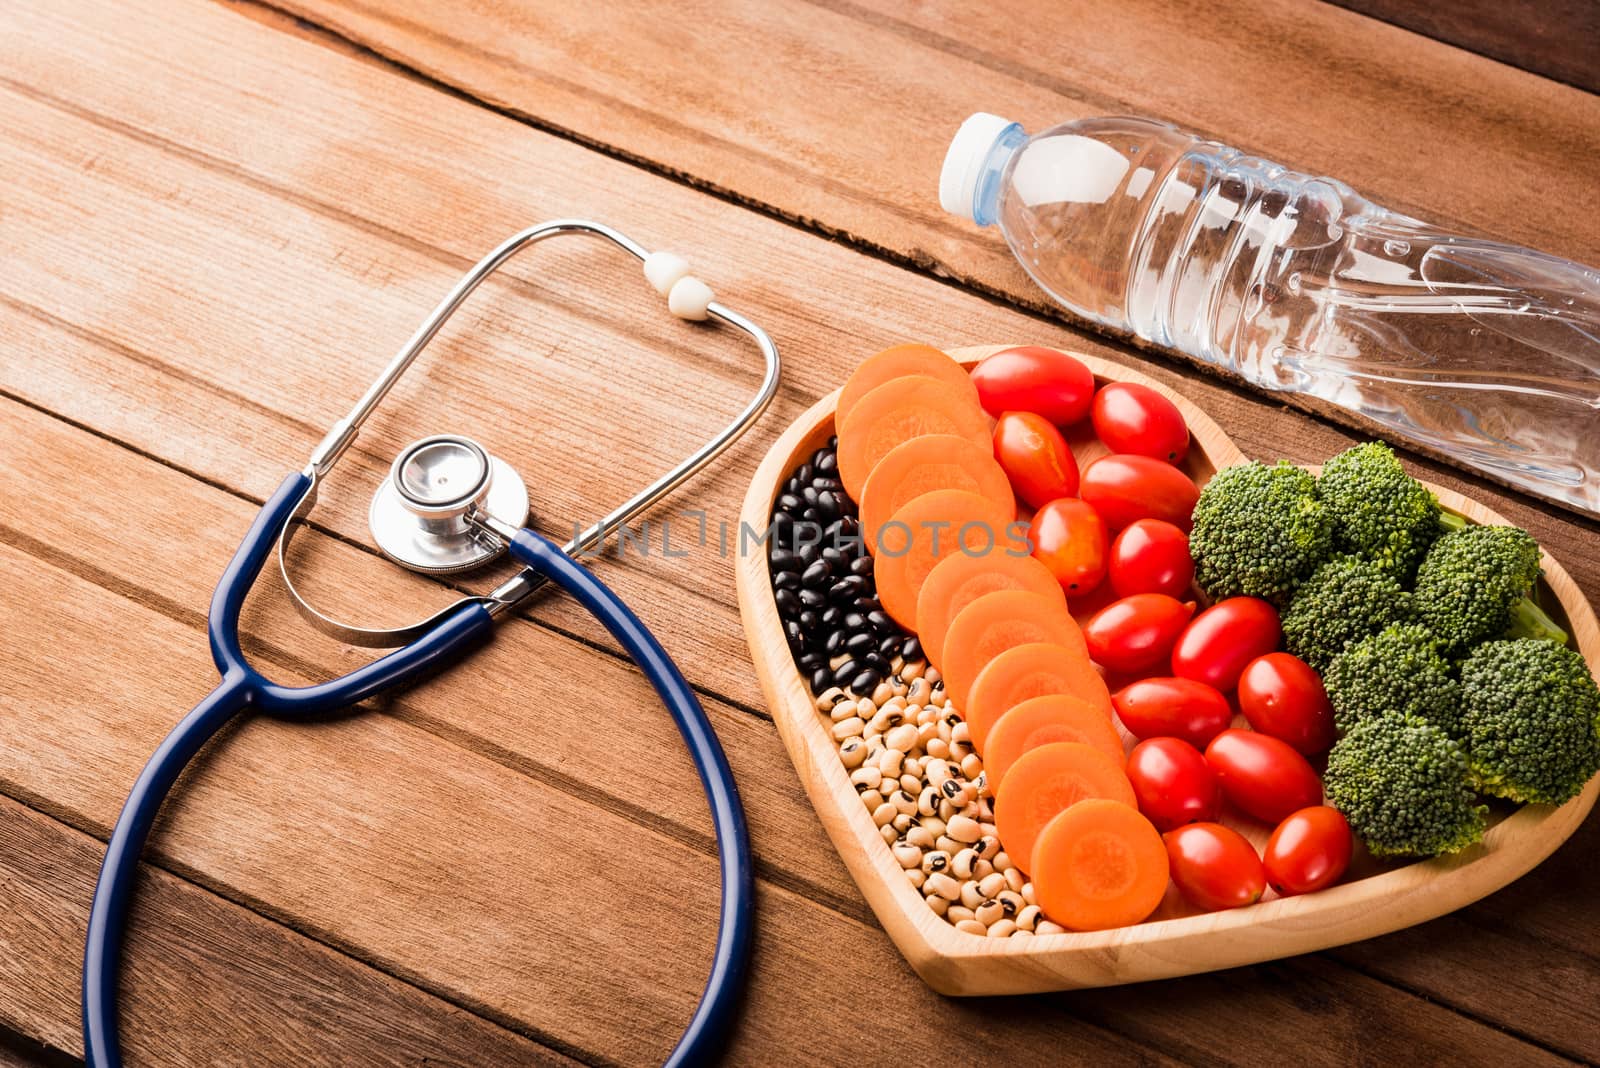 Top view of fresh organic fruits and vegetables in heart plate wood (carrot, Broccoli, tomato), doctor stethoscope and plastic water bottles on wooden table, Healthy lifestyle diet food concept